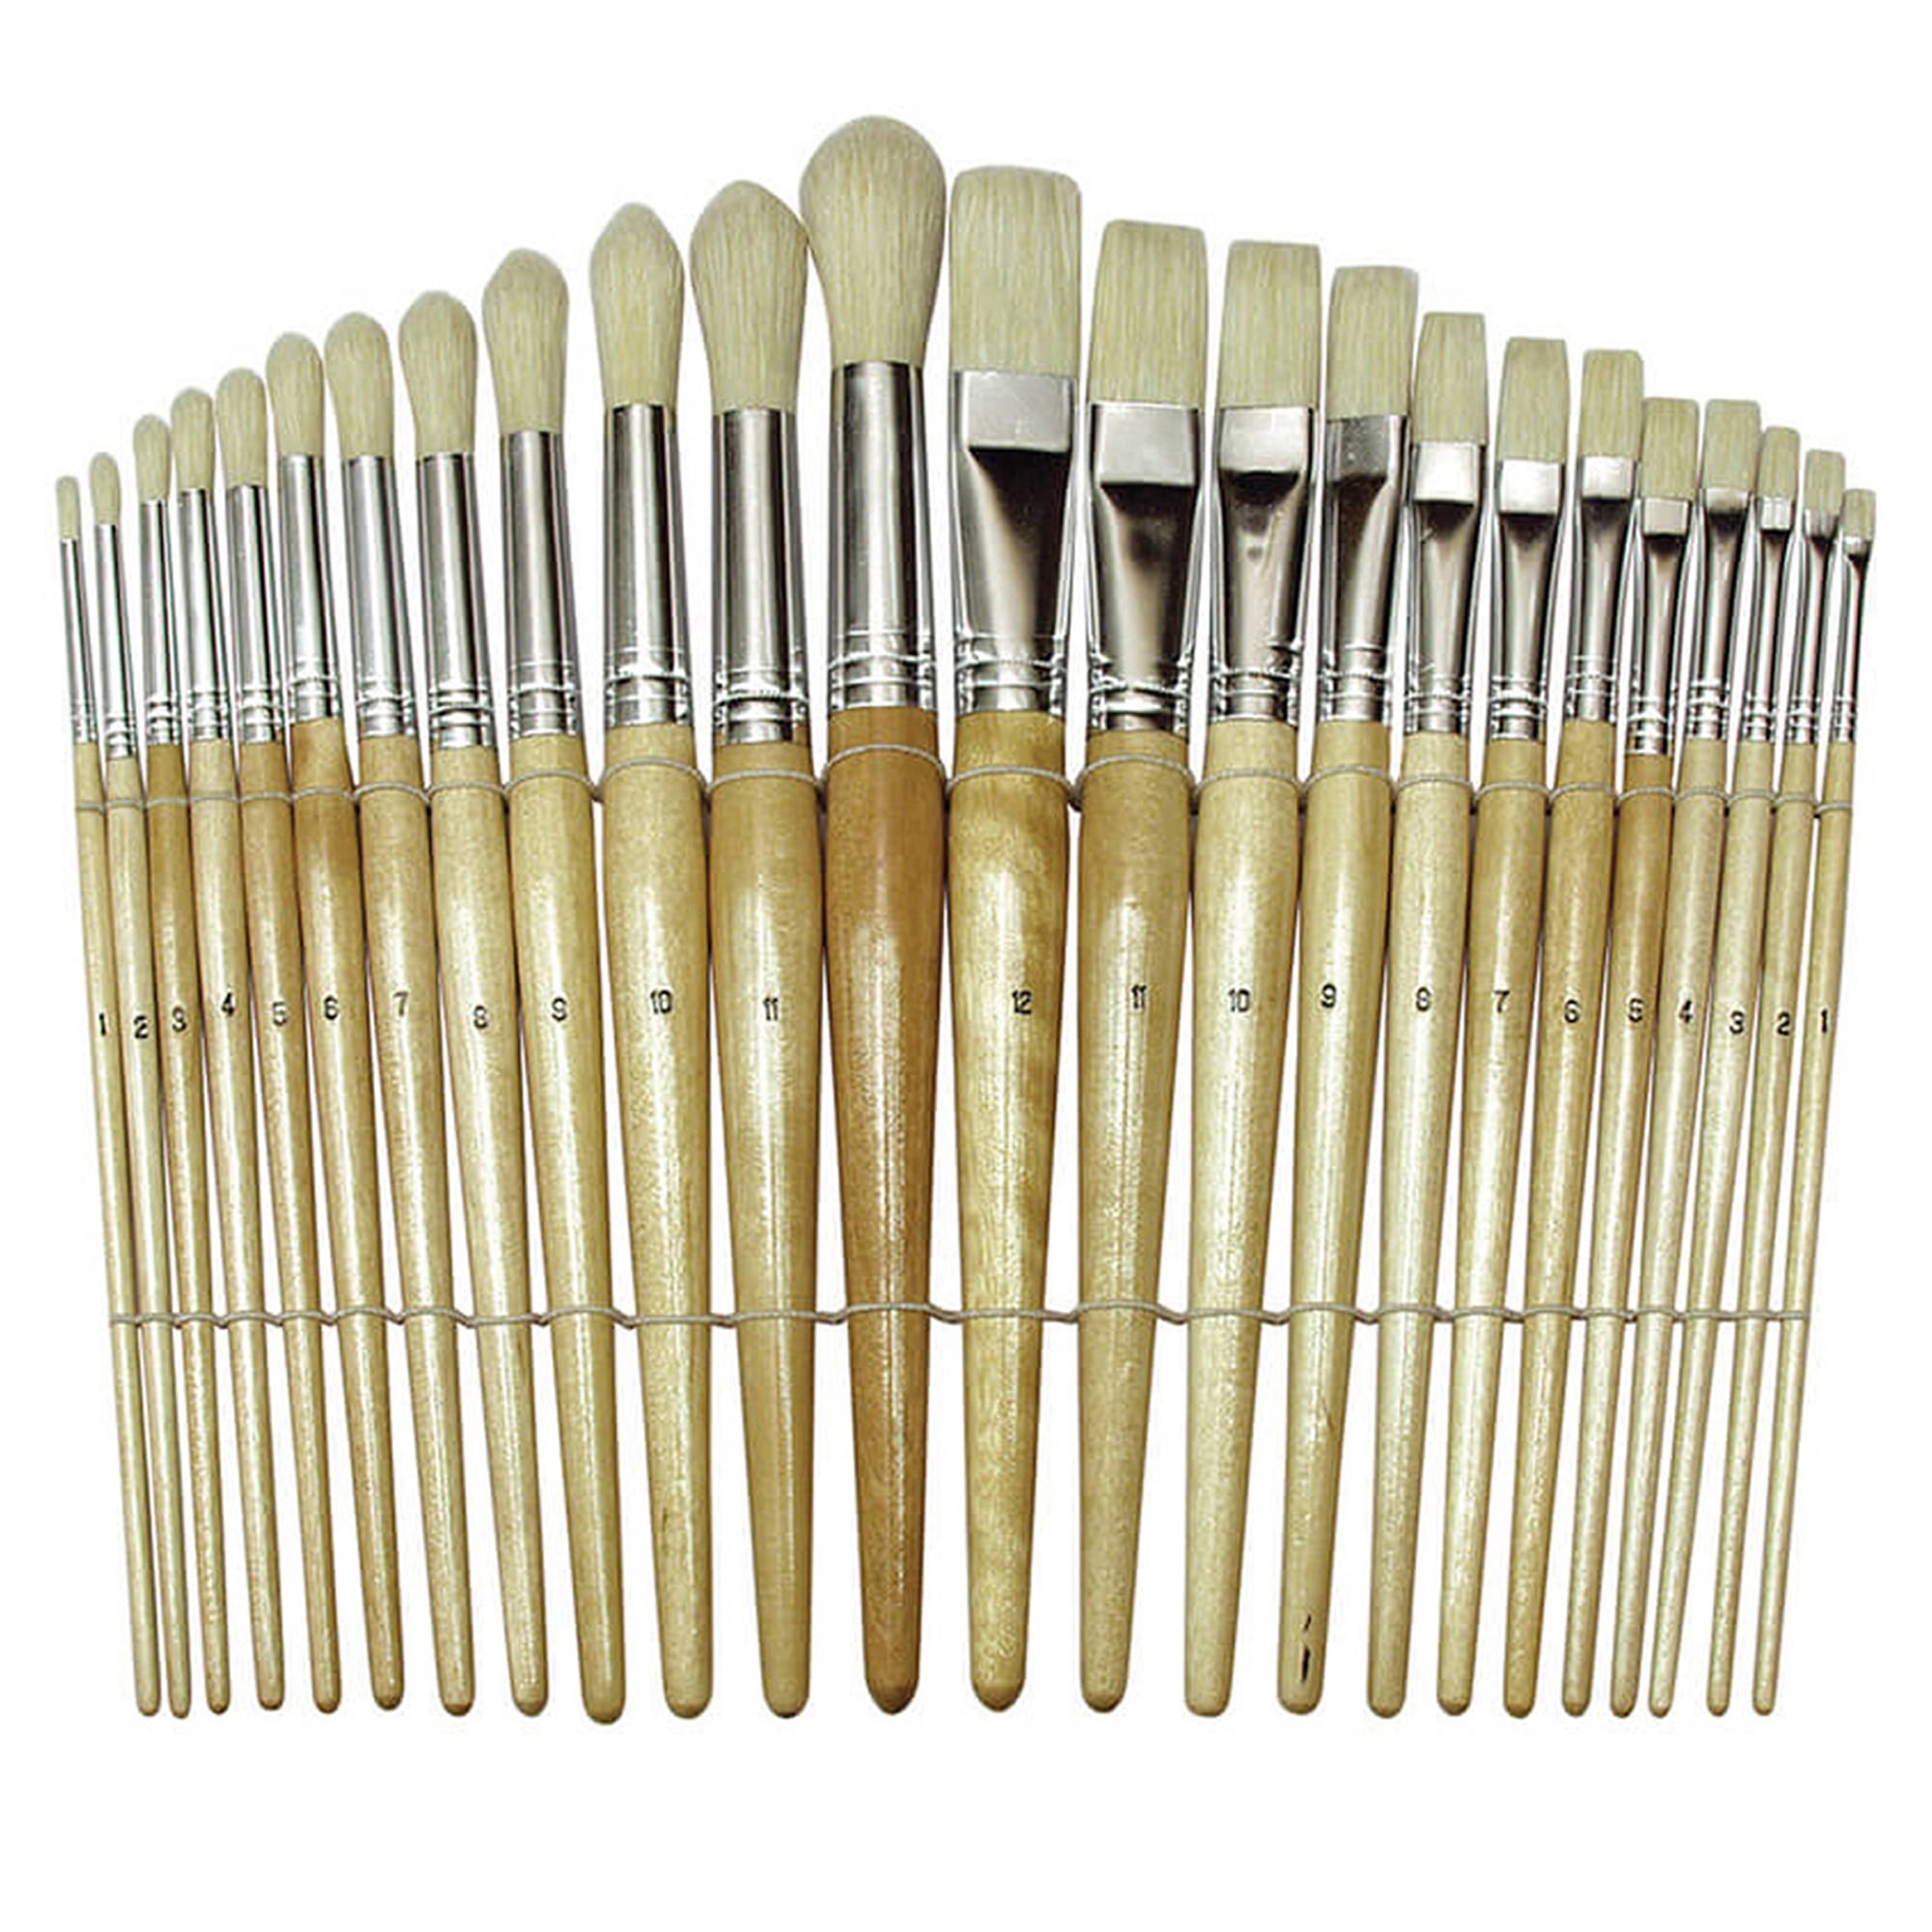 VARIOUS SIZES PACK OF 12 QUALITY PROFESSIONAL PURE BRISTLE PAINT BRUSHES 